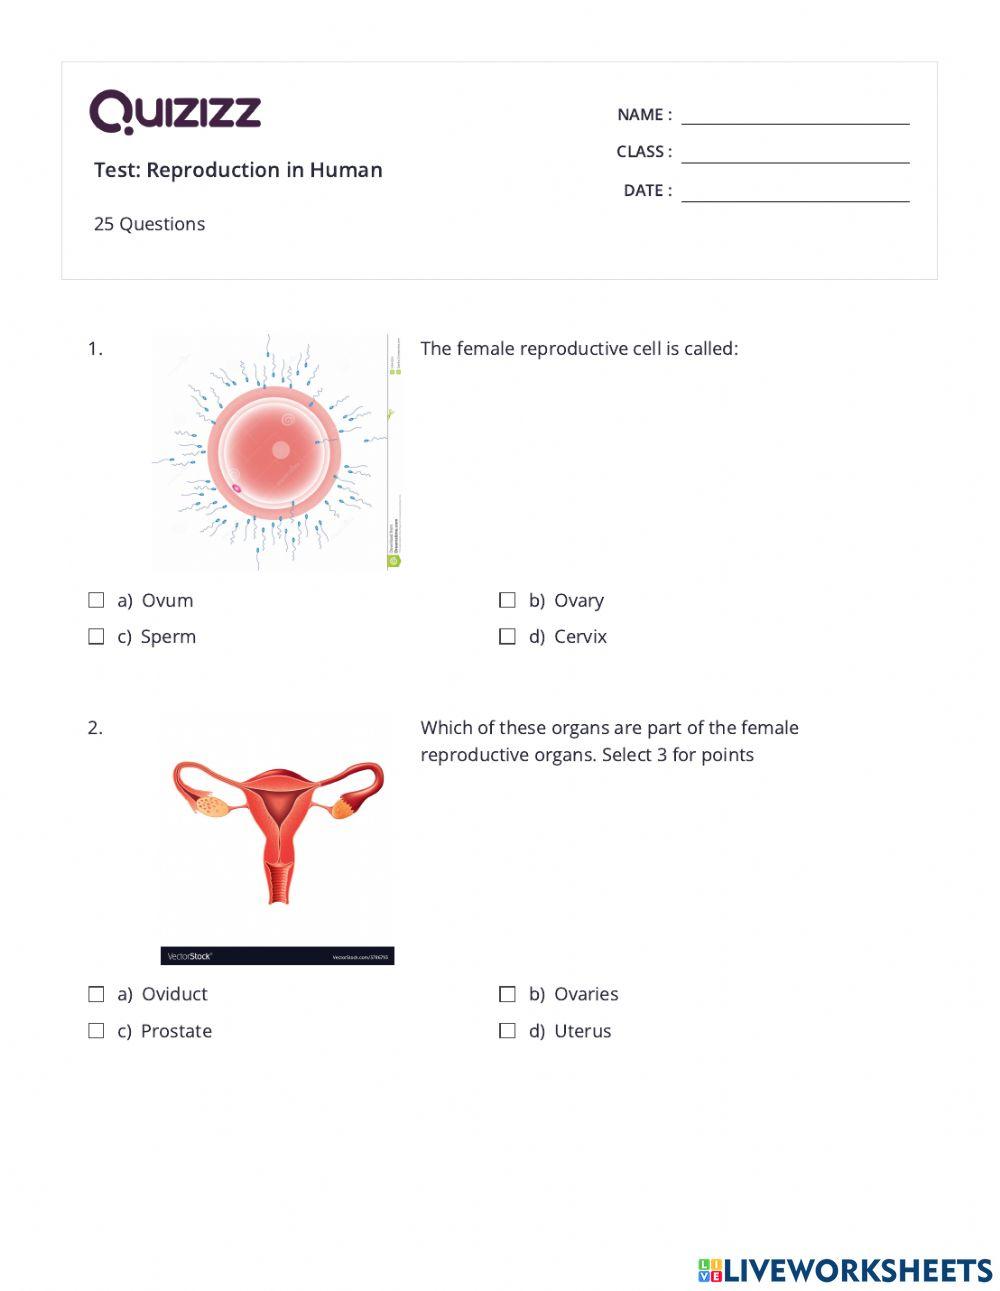 Test on Reproduction in Human